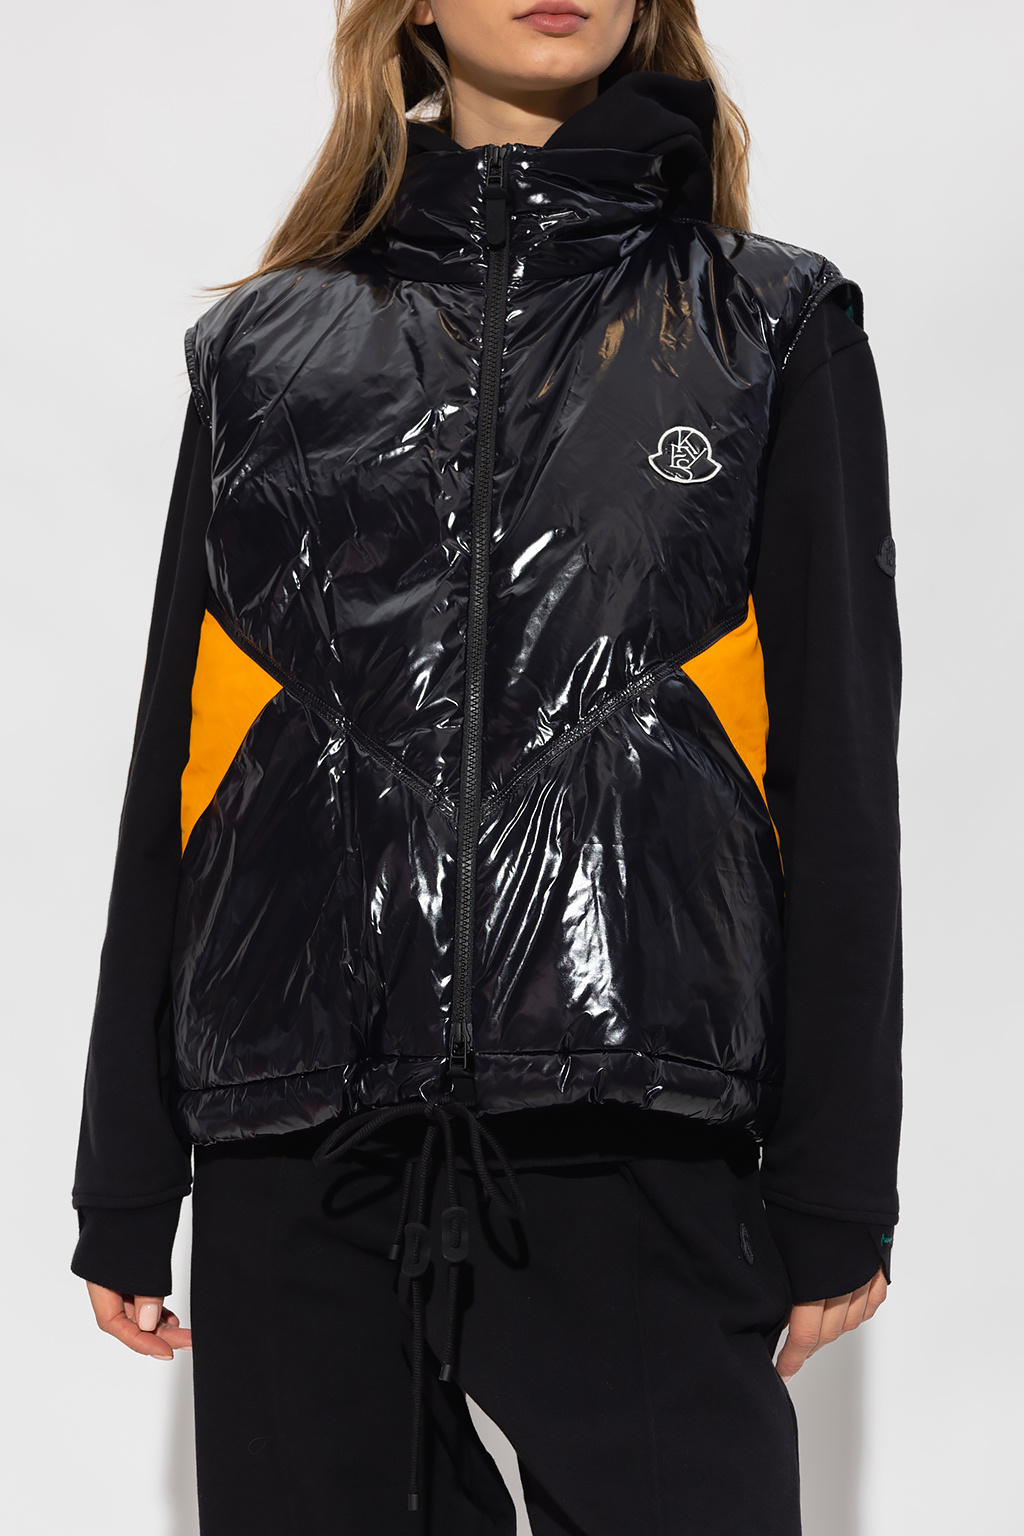 Moncler Genius 2 Outer and Inner layer